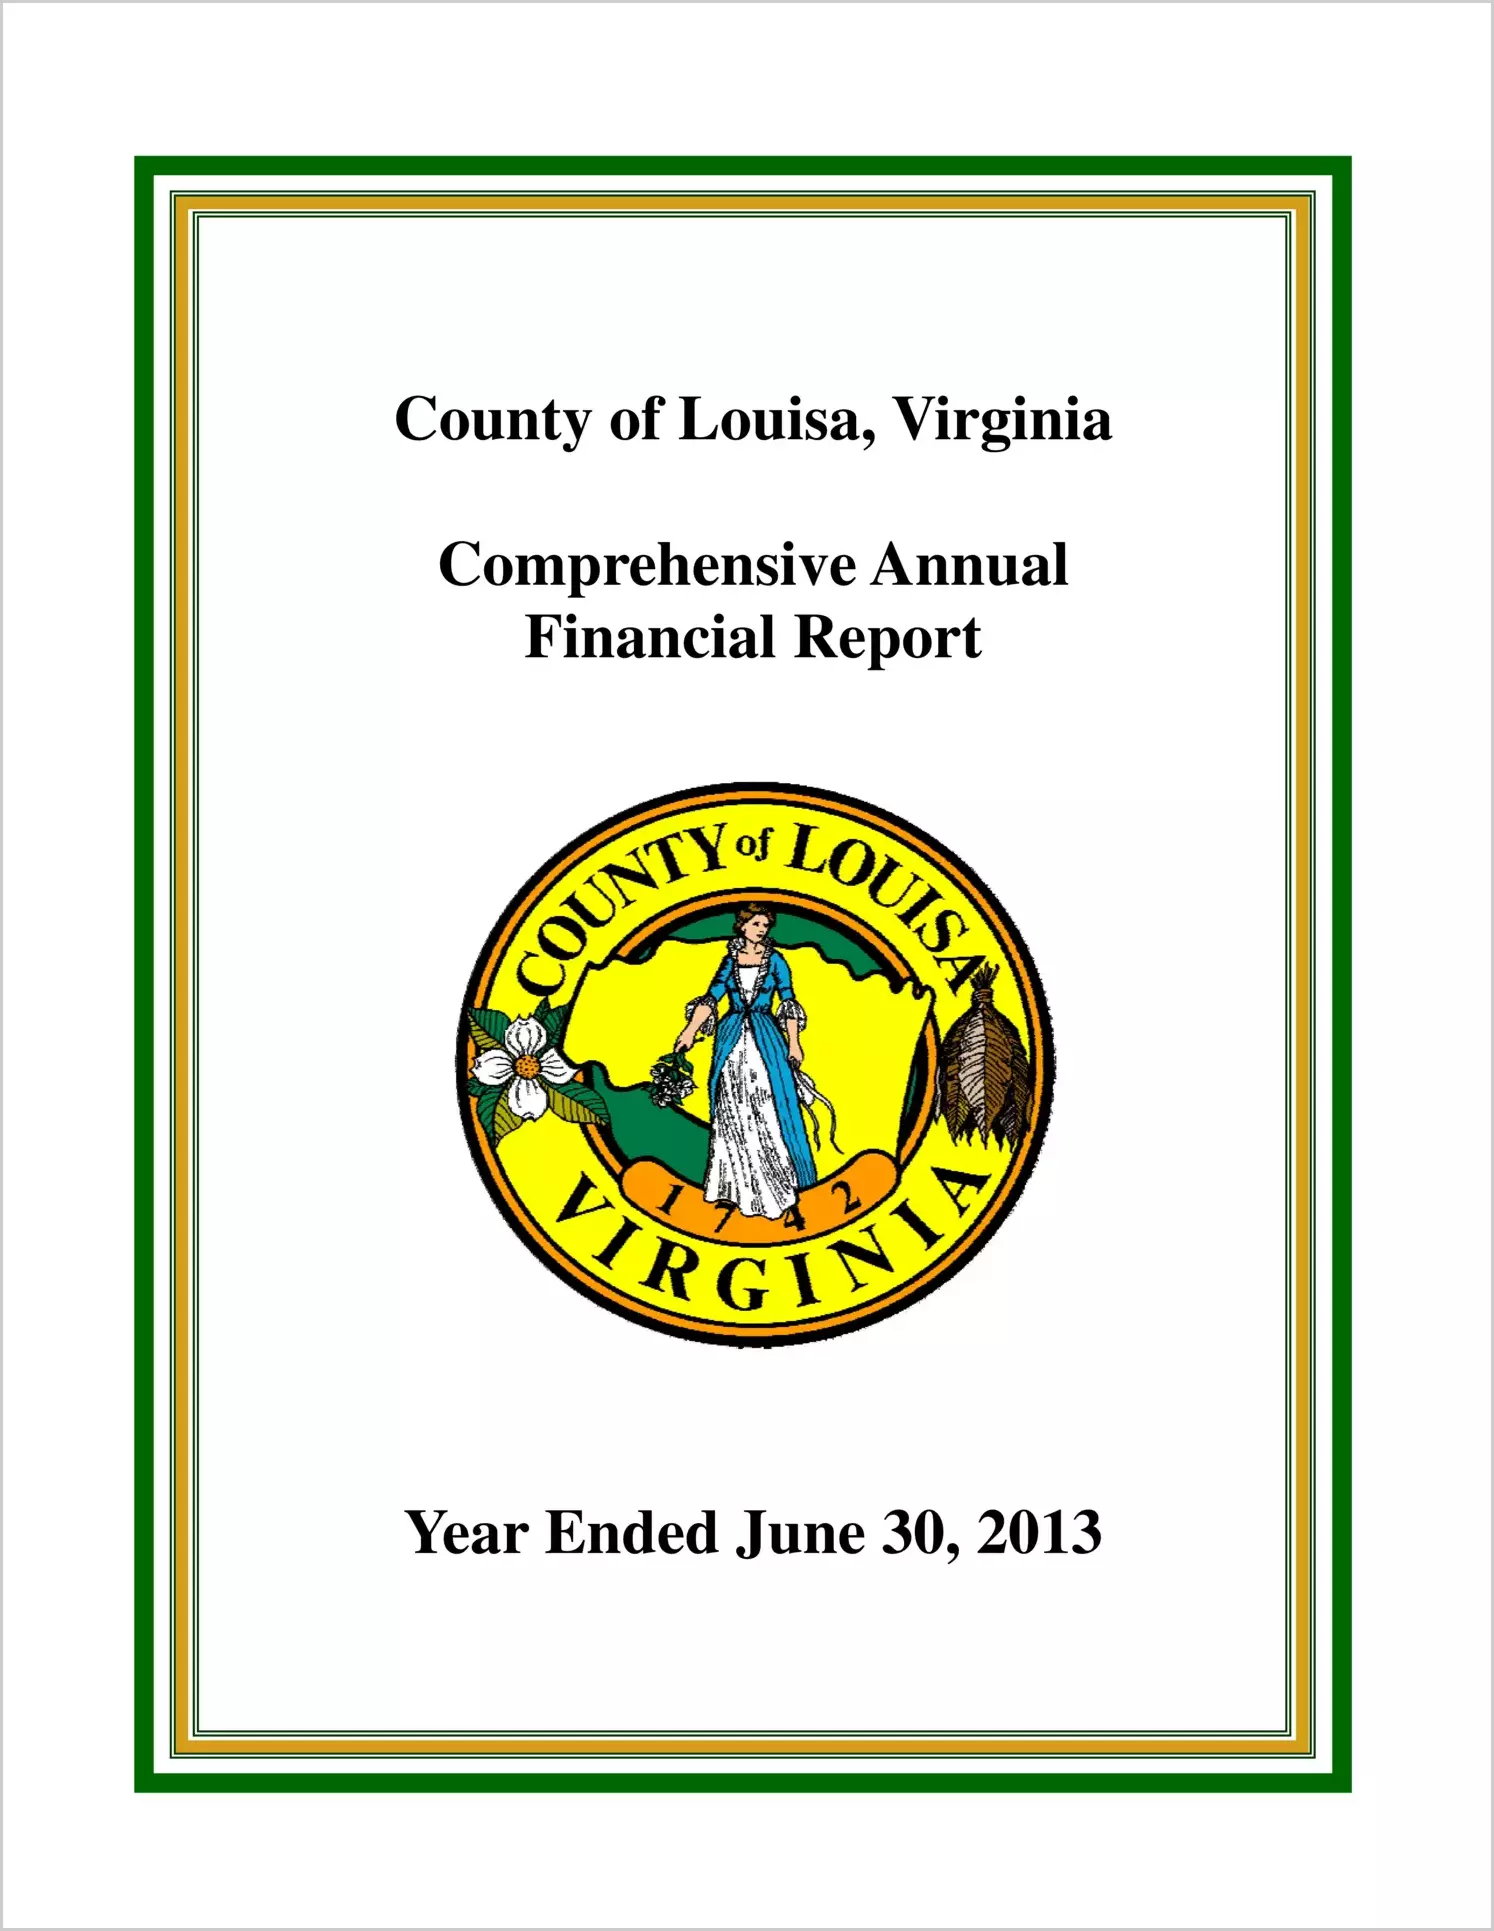 2013 Annual Financial Report for County of Louisa